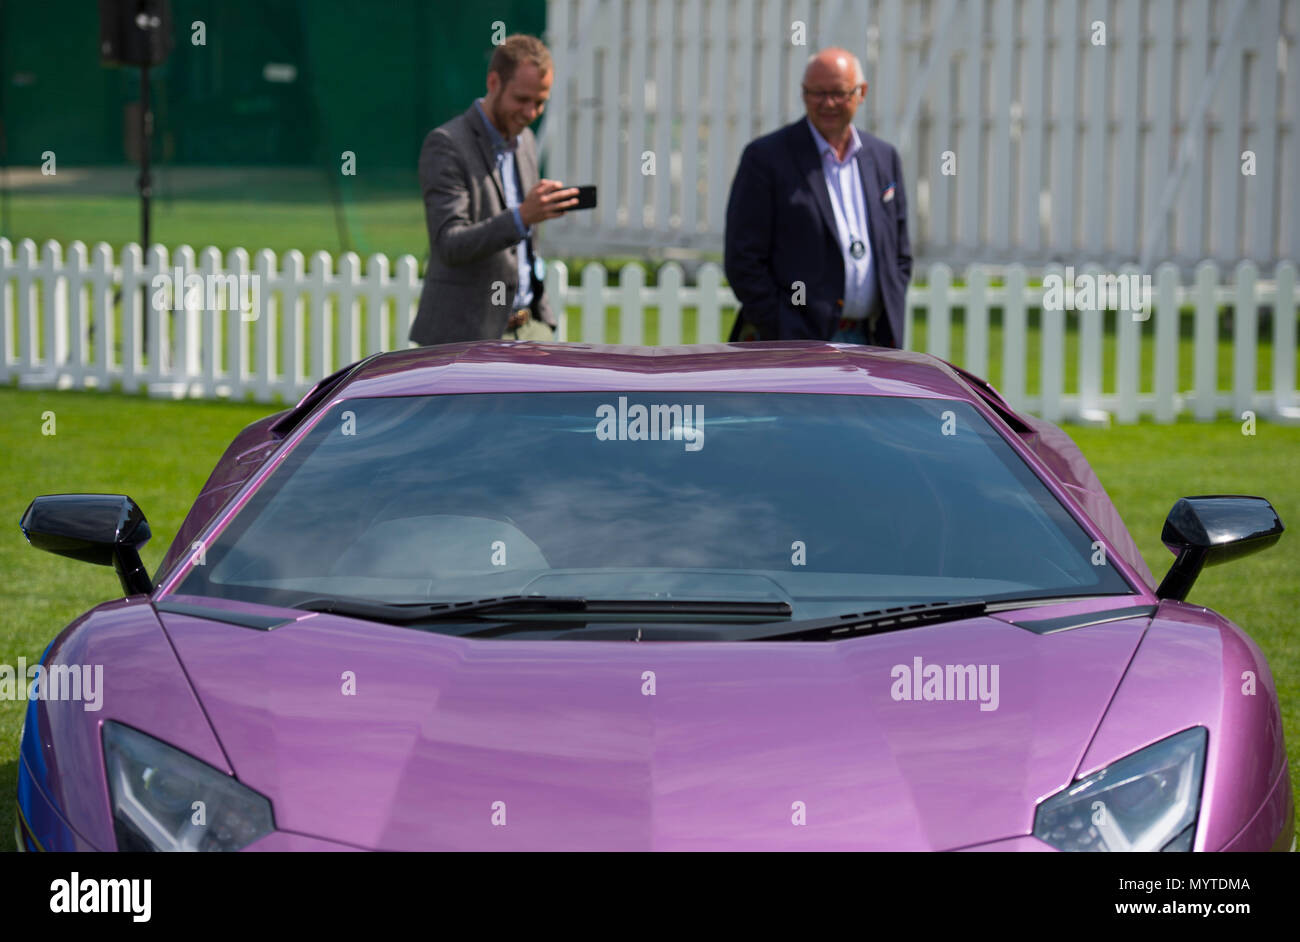 Honourable Artillery Company, London, UK. 8 June, 2018. A display of some of the world’s finest cars in the intimate setting of the gardens of the Honourable Artillery Company under a hot sun, surrounded by City offices. Credit: Malcolm Park/Alamy Live News. Stock Photo